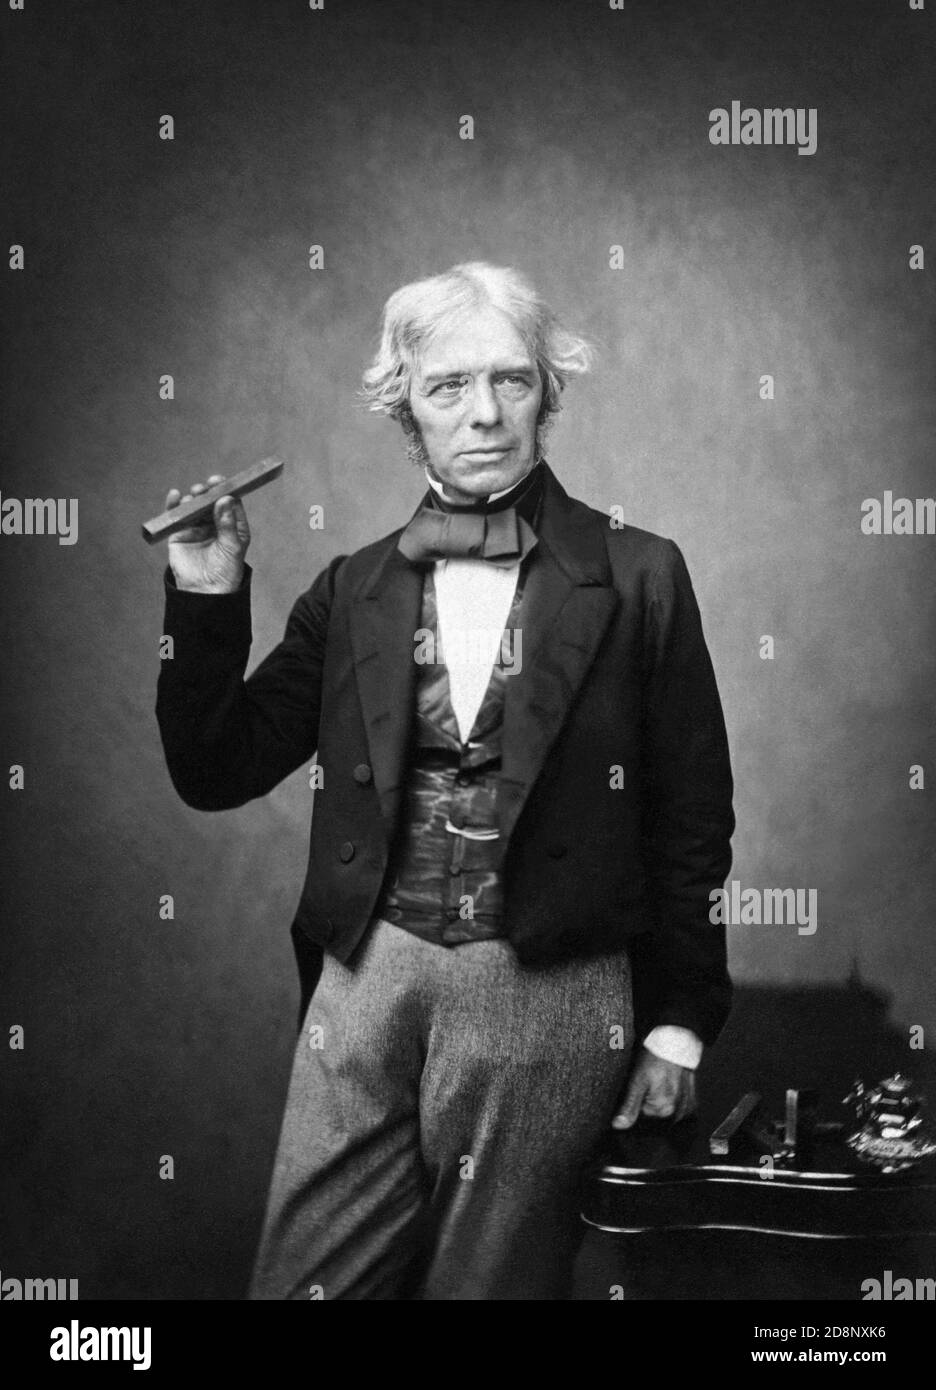 Michael Faraday FRS (1791–1867), one of the most influential scientists in history, holding a bar magnet in 1857 in a portrait by Maull & Polyblank. Stock Photo